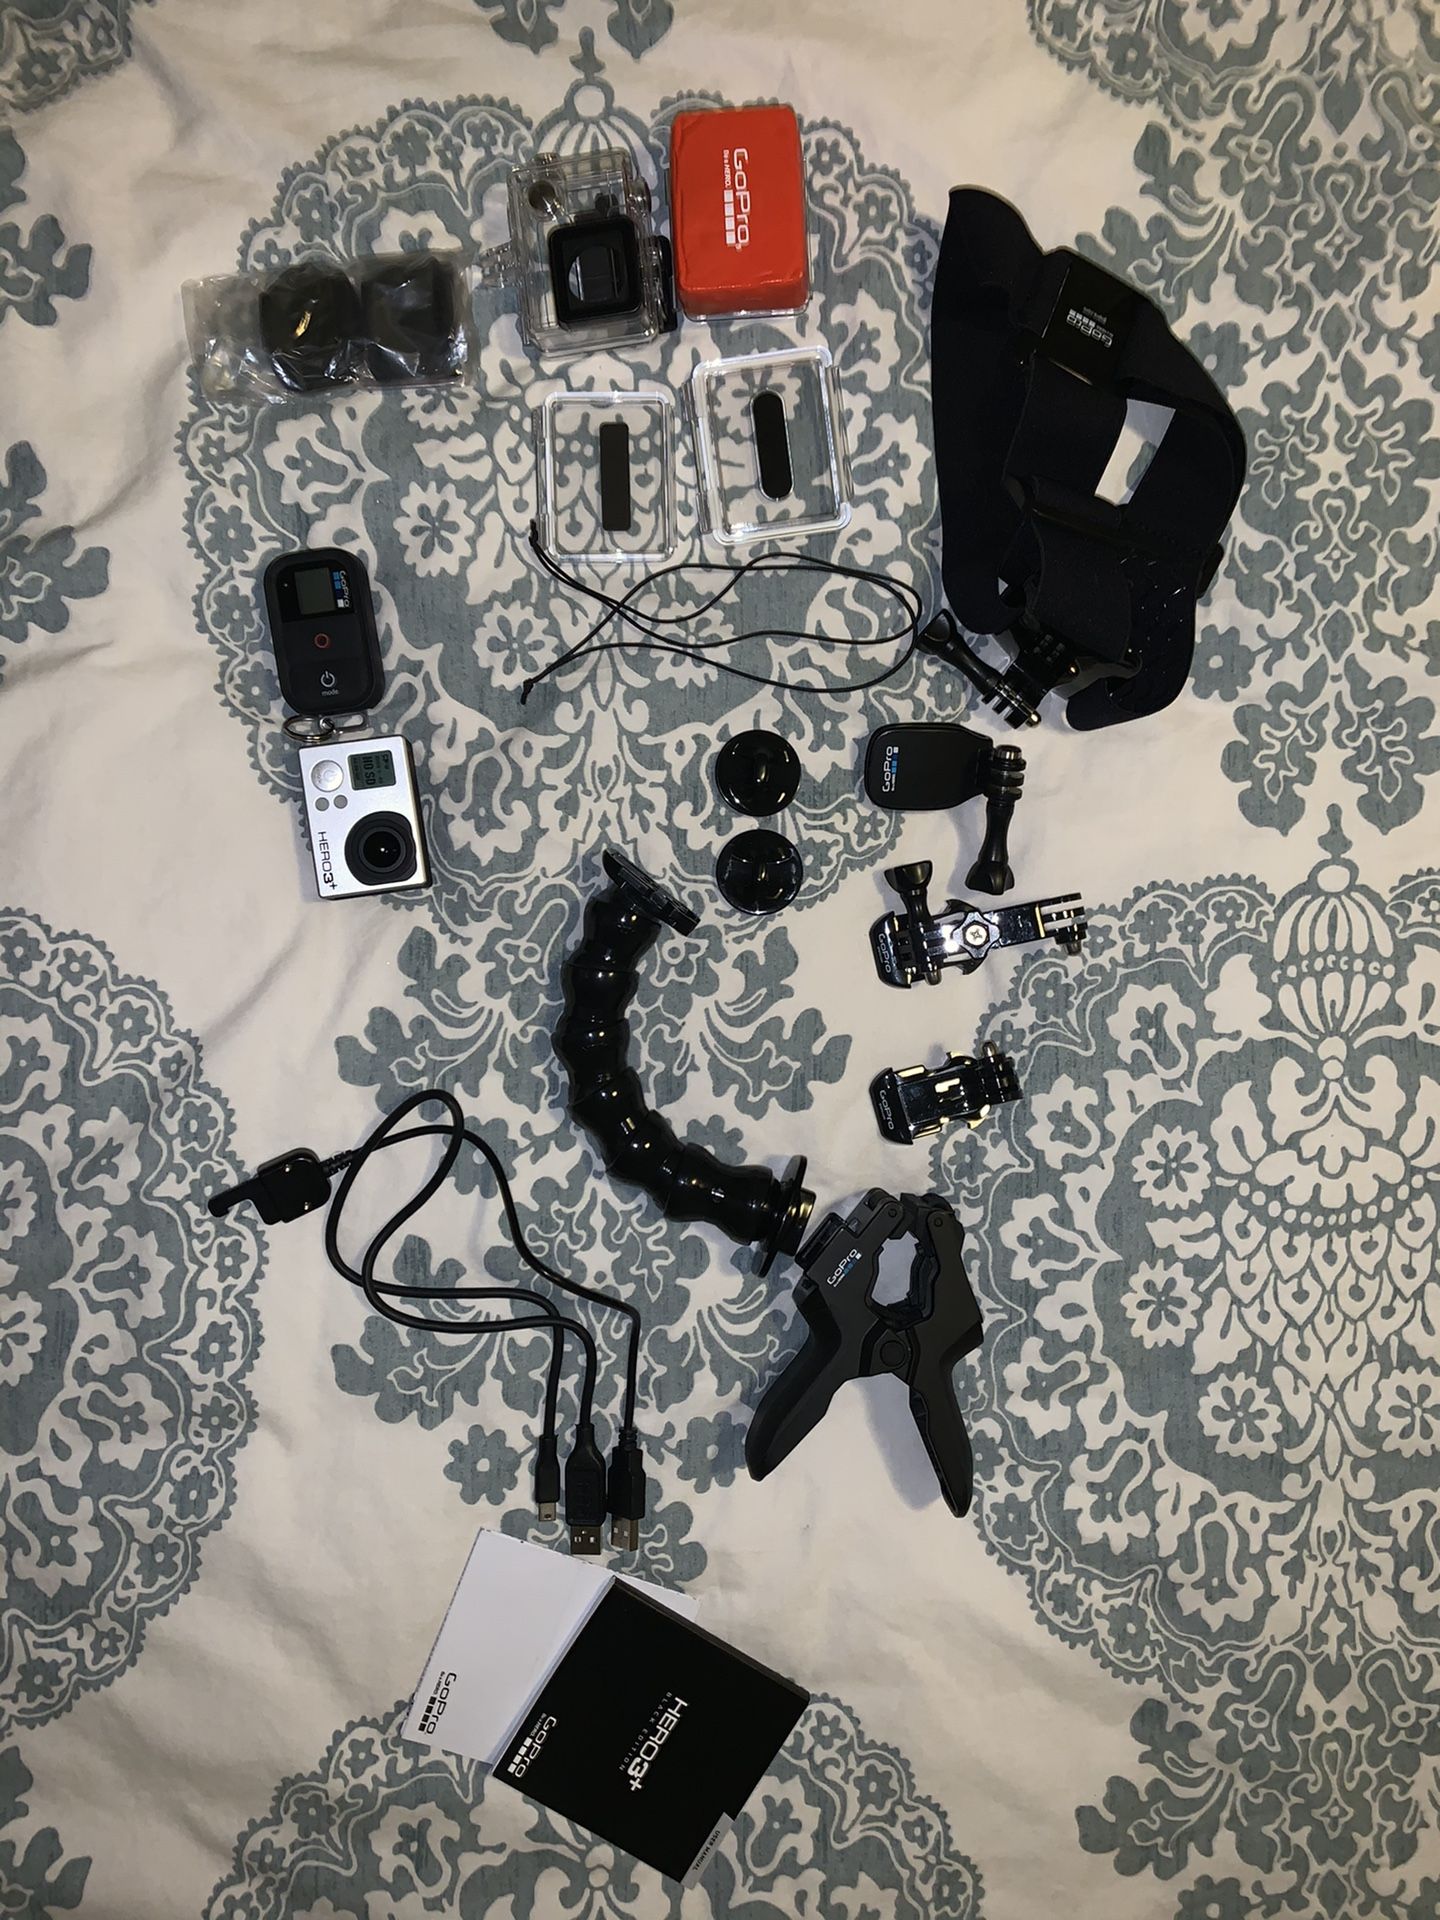 GoPro Hero3+ with Accessories